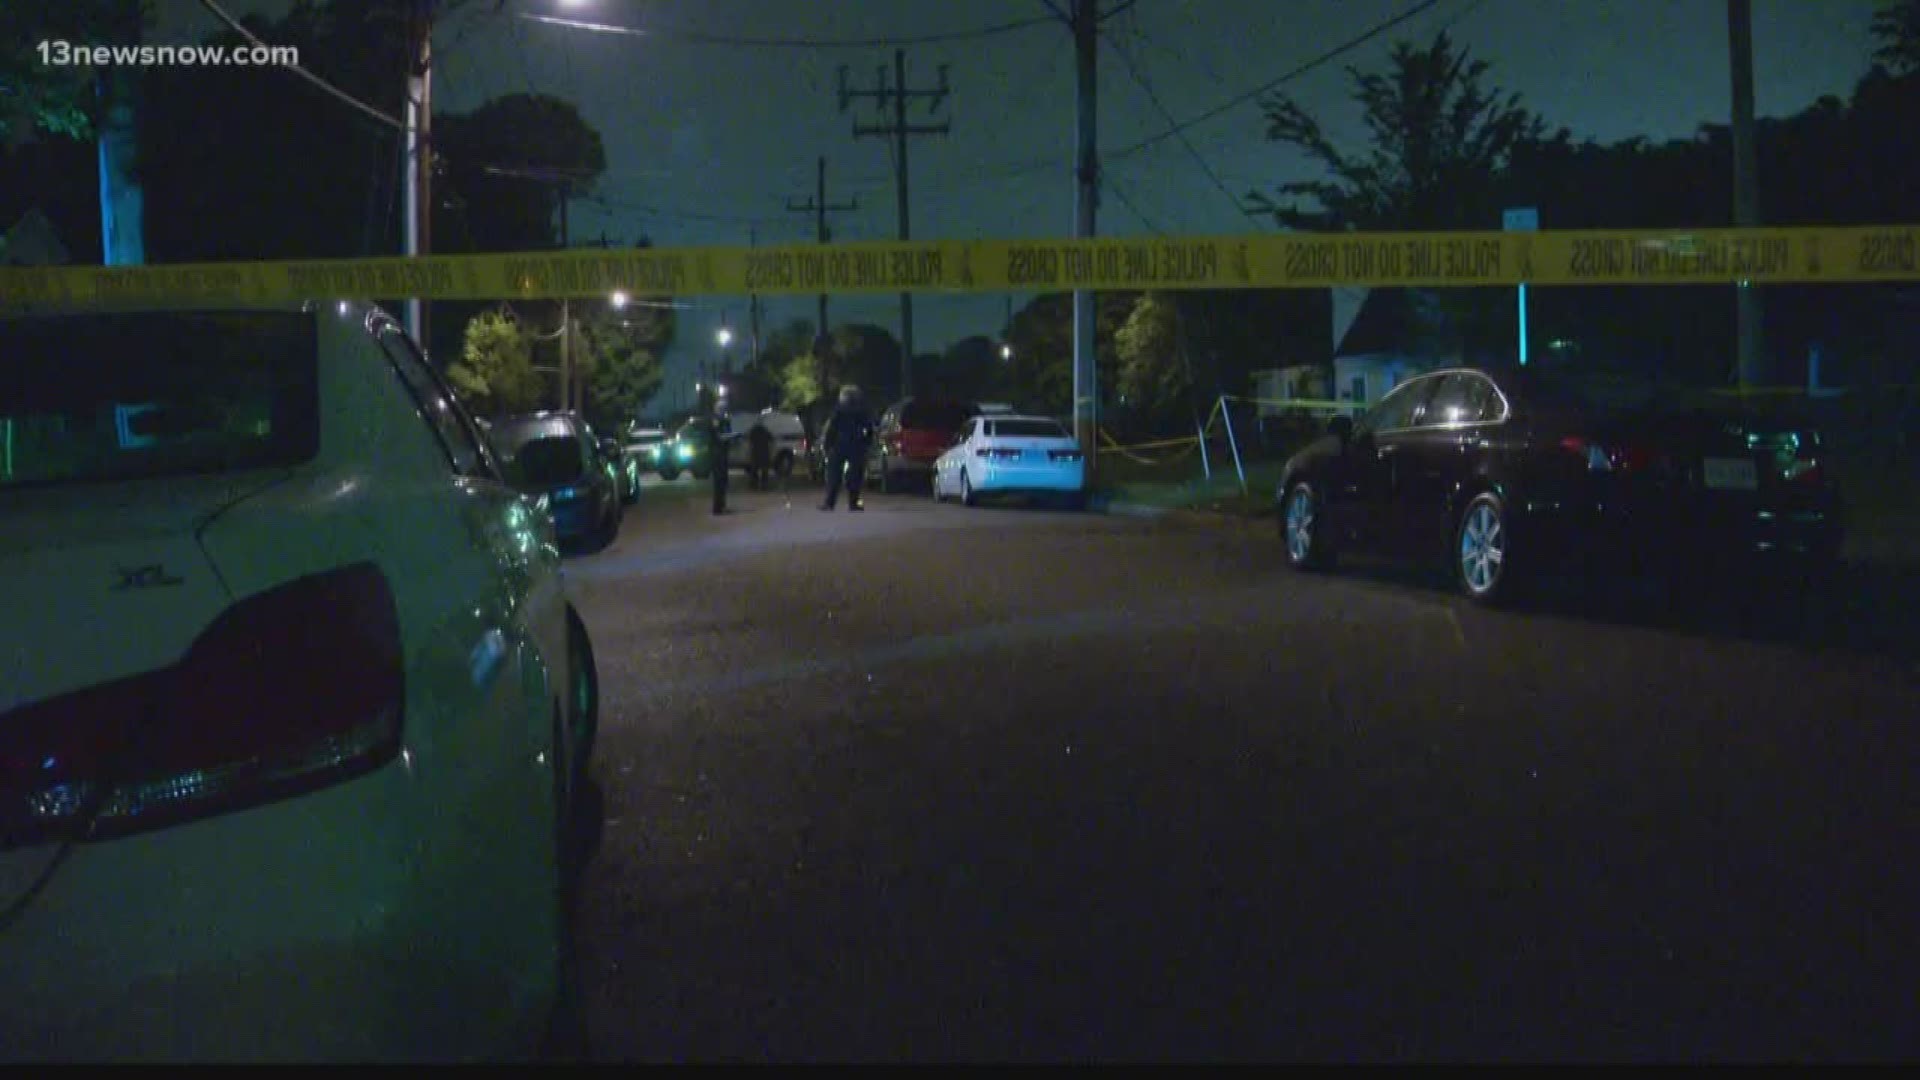 Police investigated an overnight shooting on Norchester Avenue in Norfolk that landed two people in the hospital.